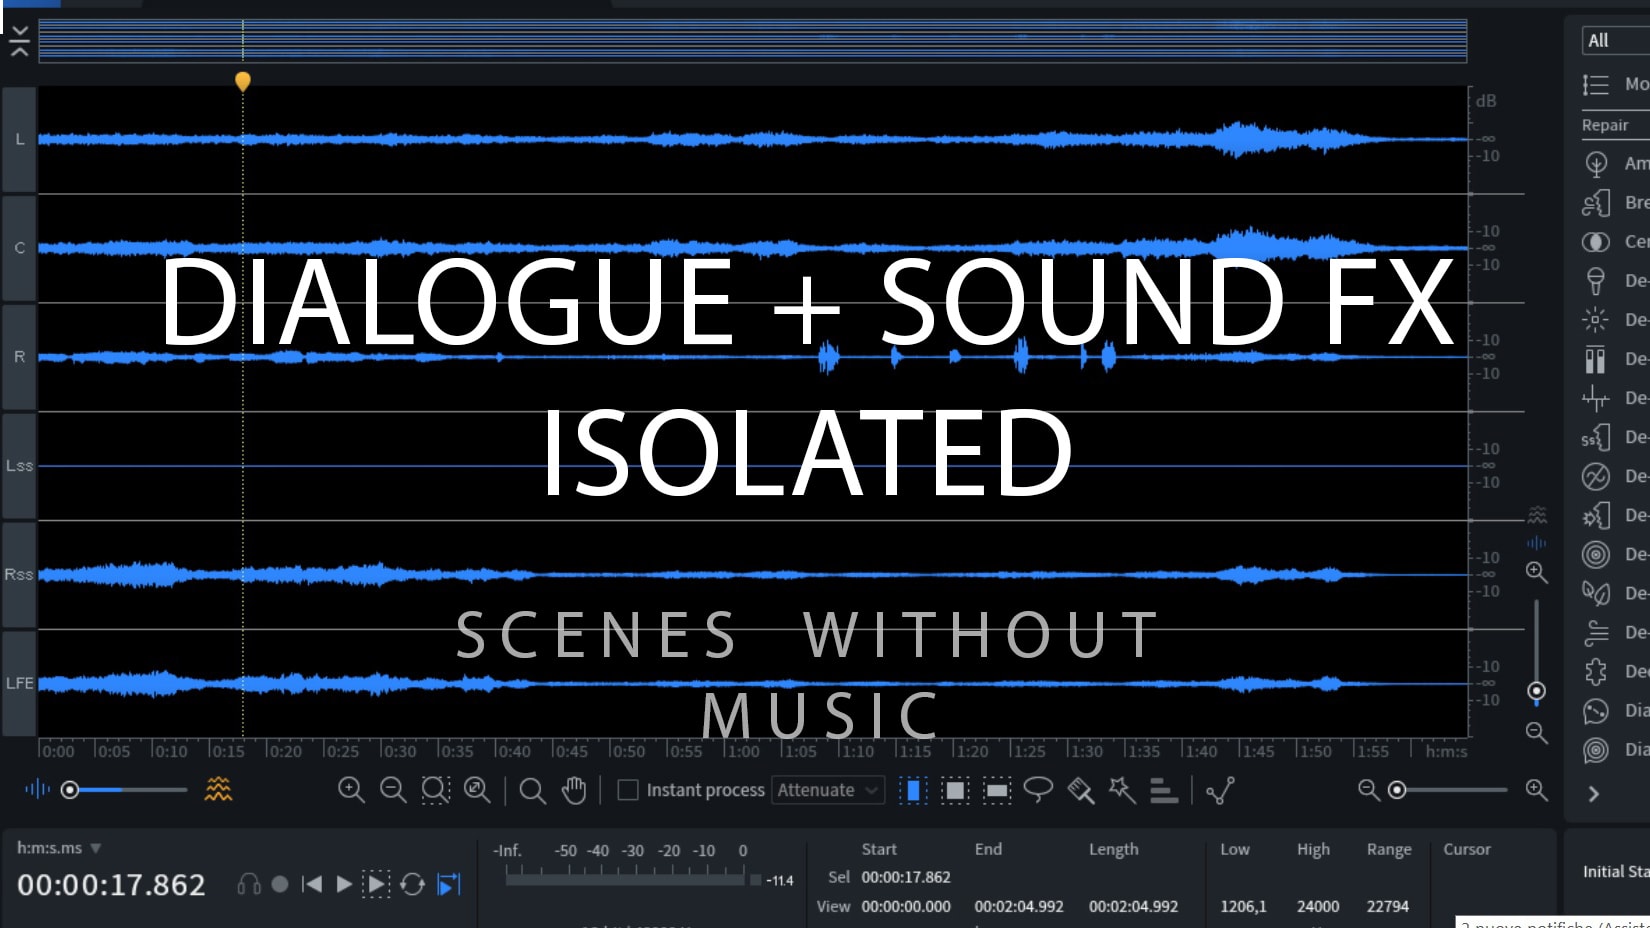 Remove background music from any scene by Stefanotiero | Fiverr